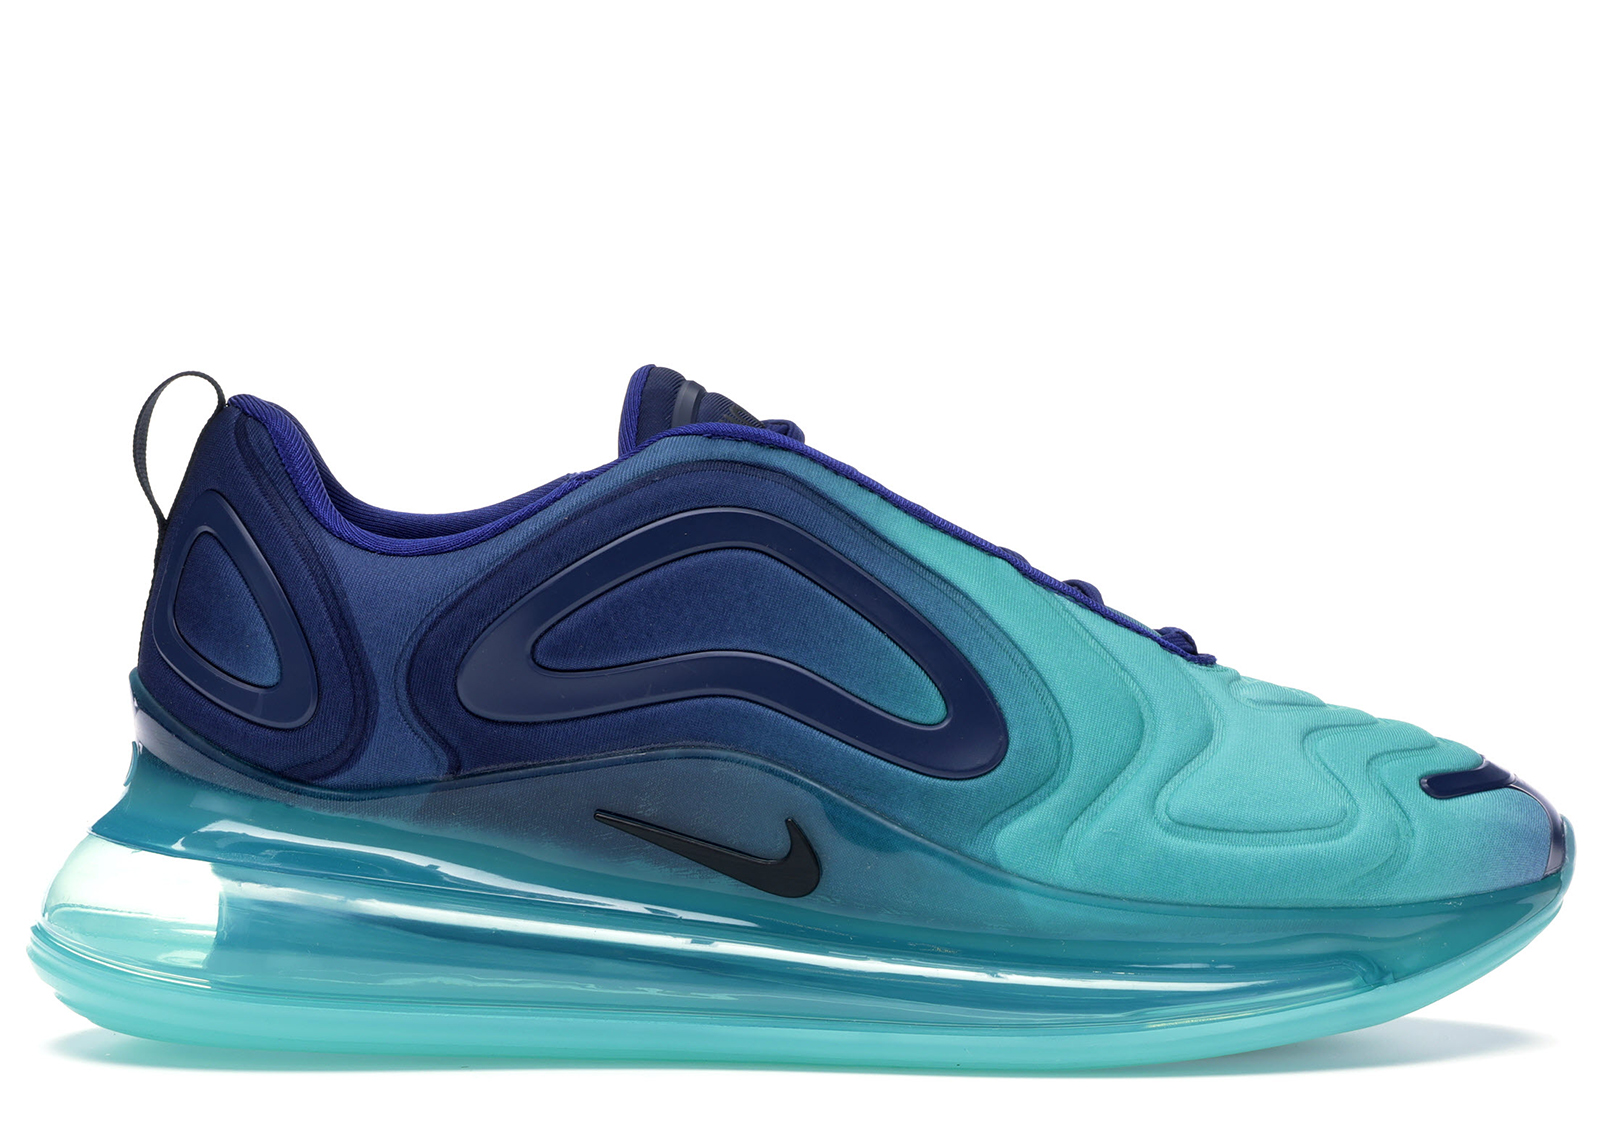 Buy Nike Air Max 720 Size 8.5 Shoes & Deadstock Sneakers